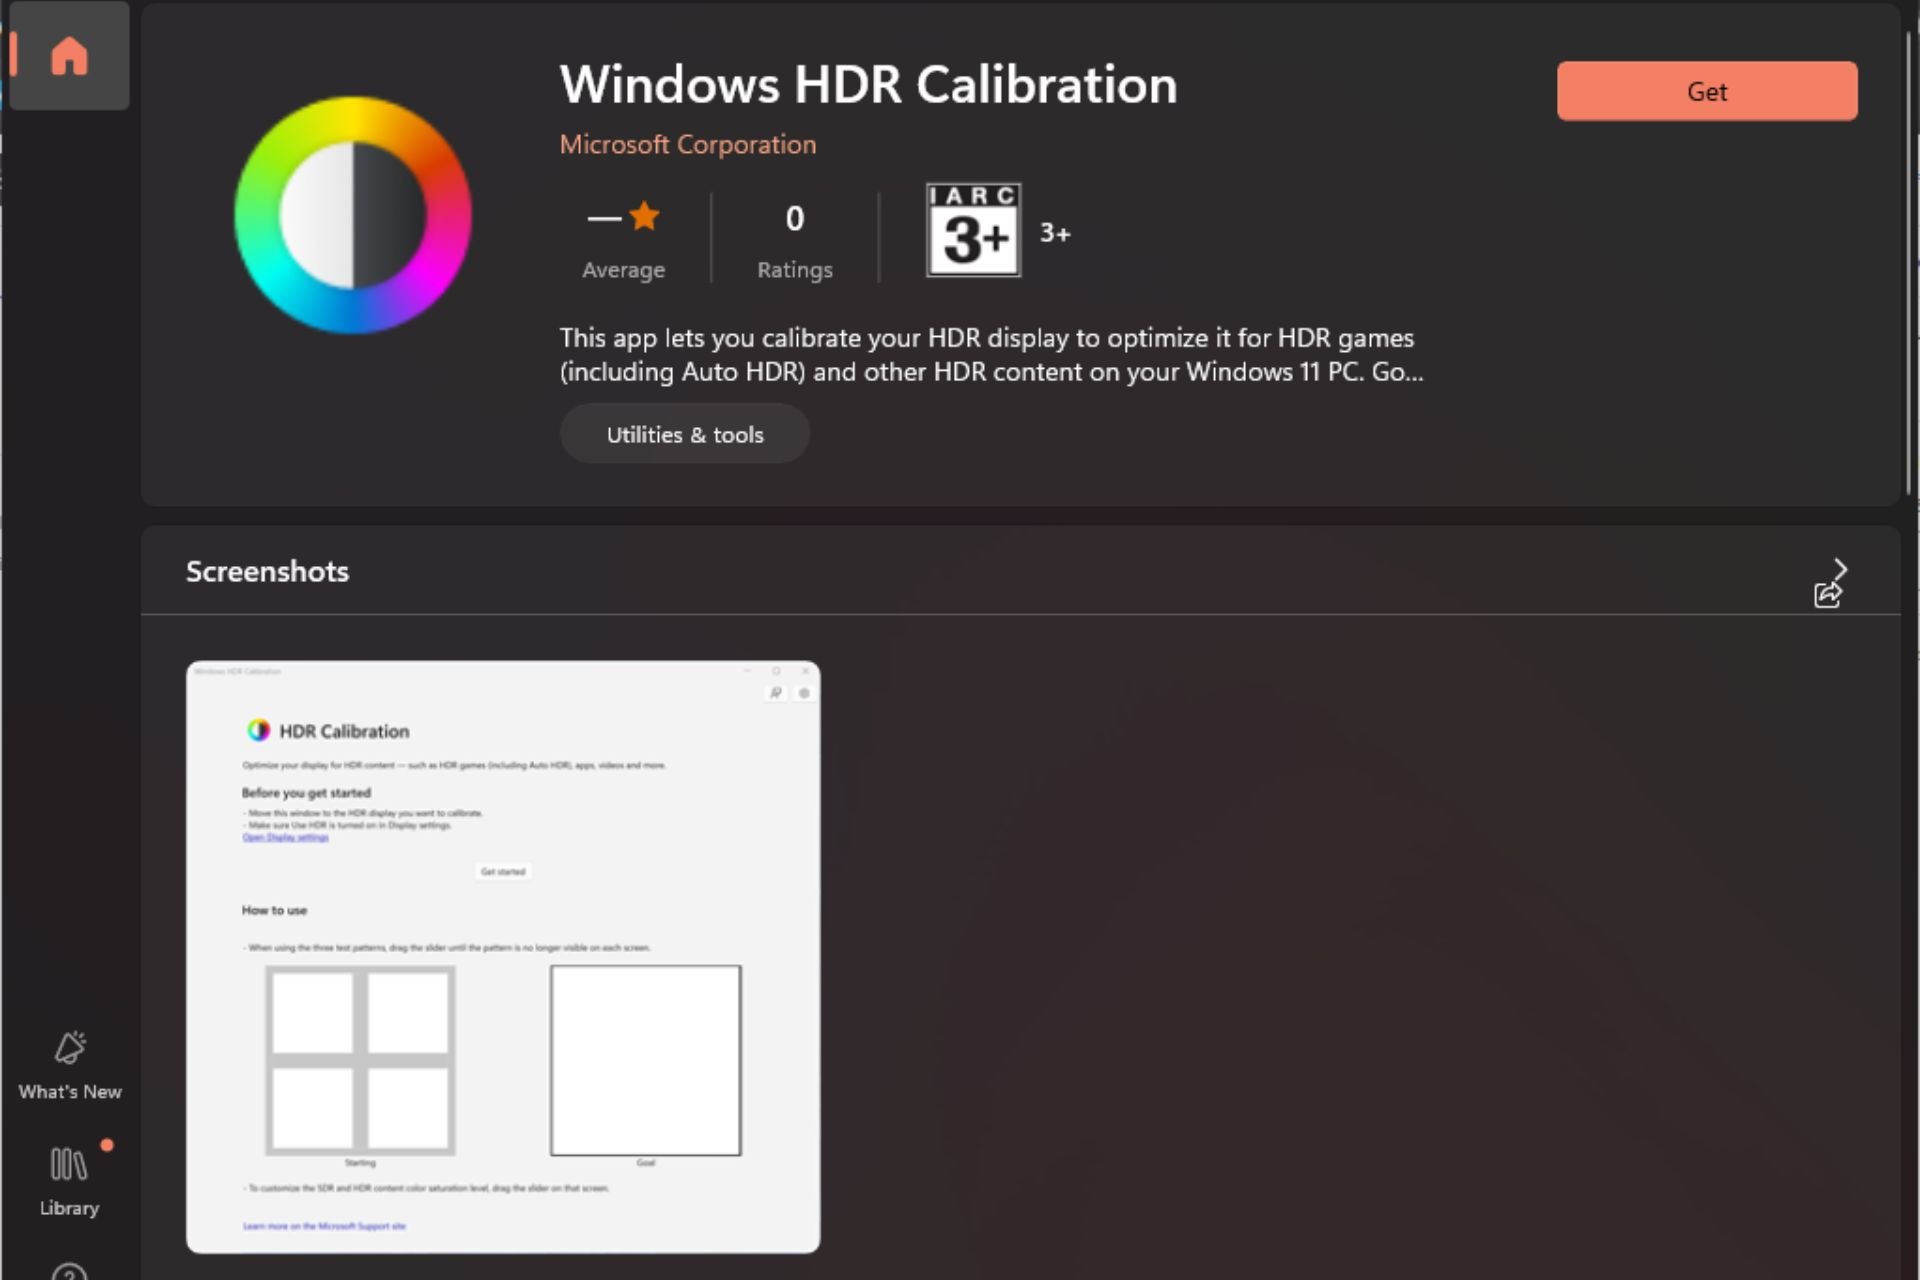 How to Calibrate HDR in Windows 11